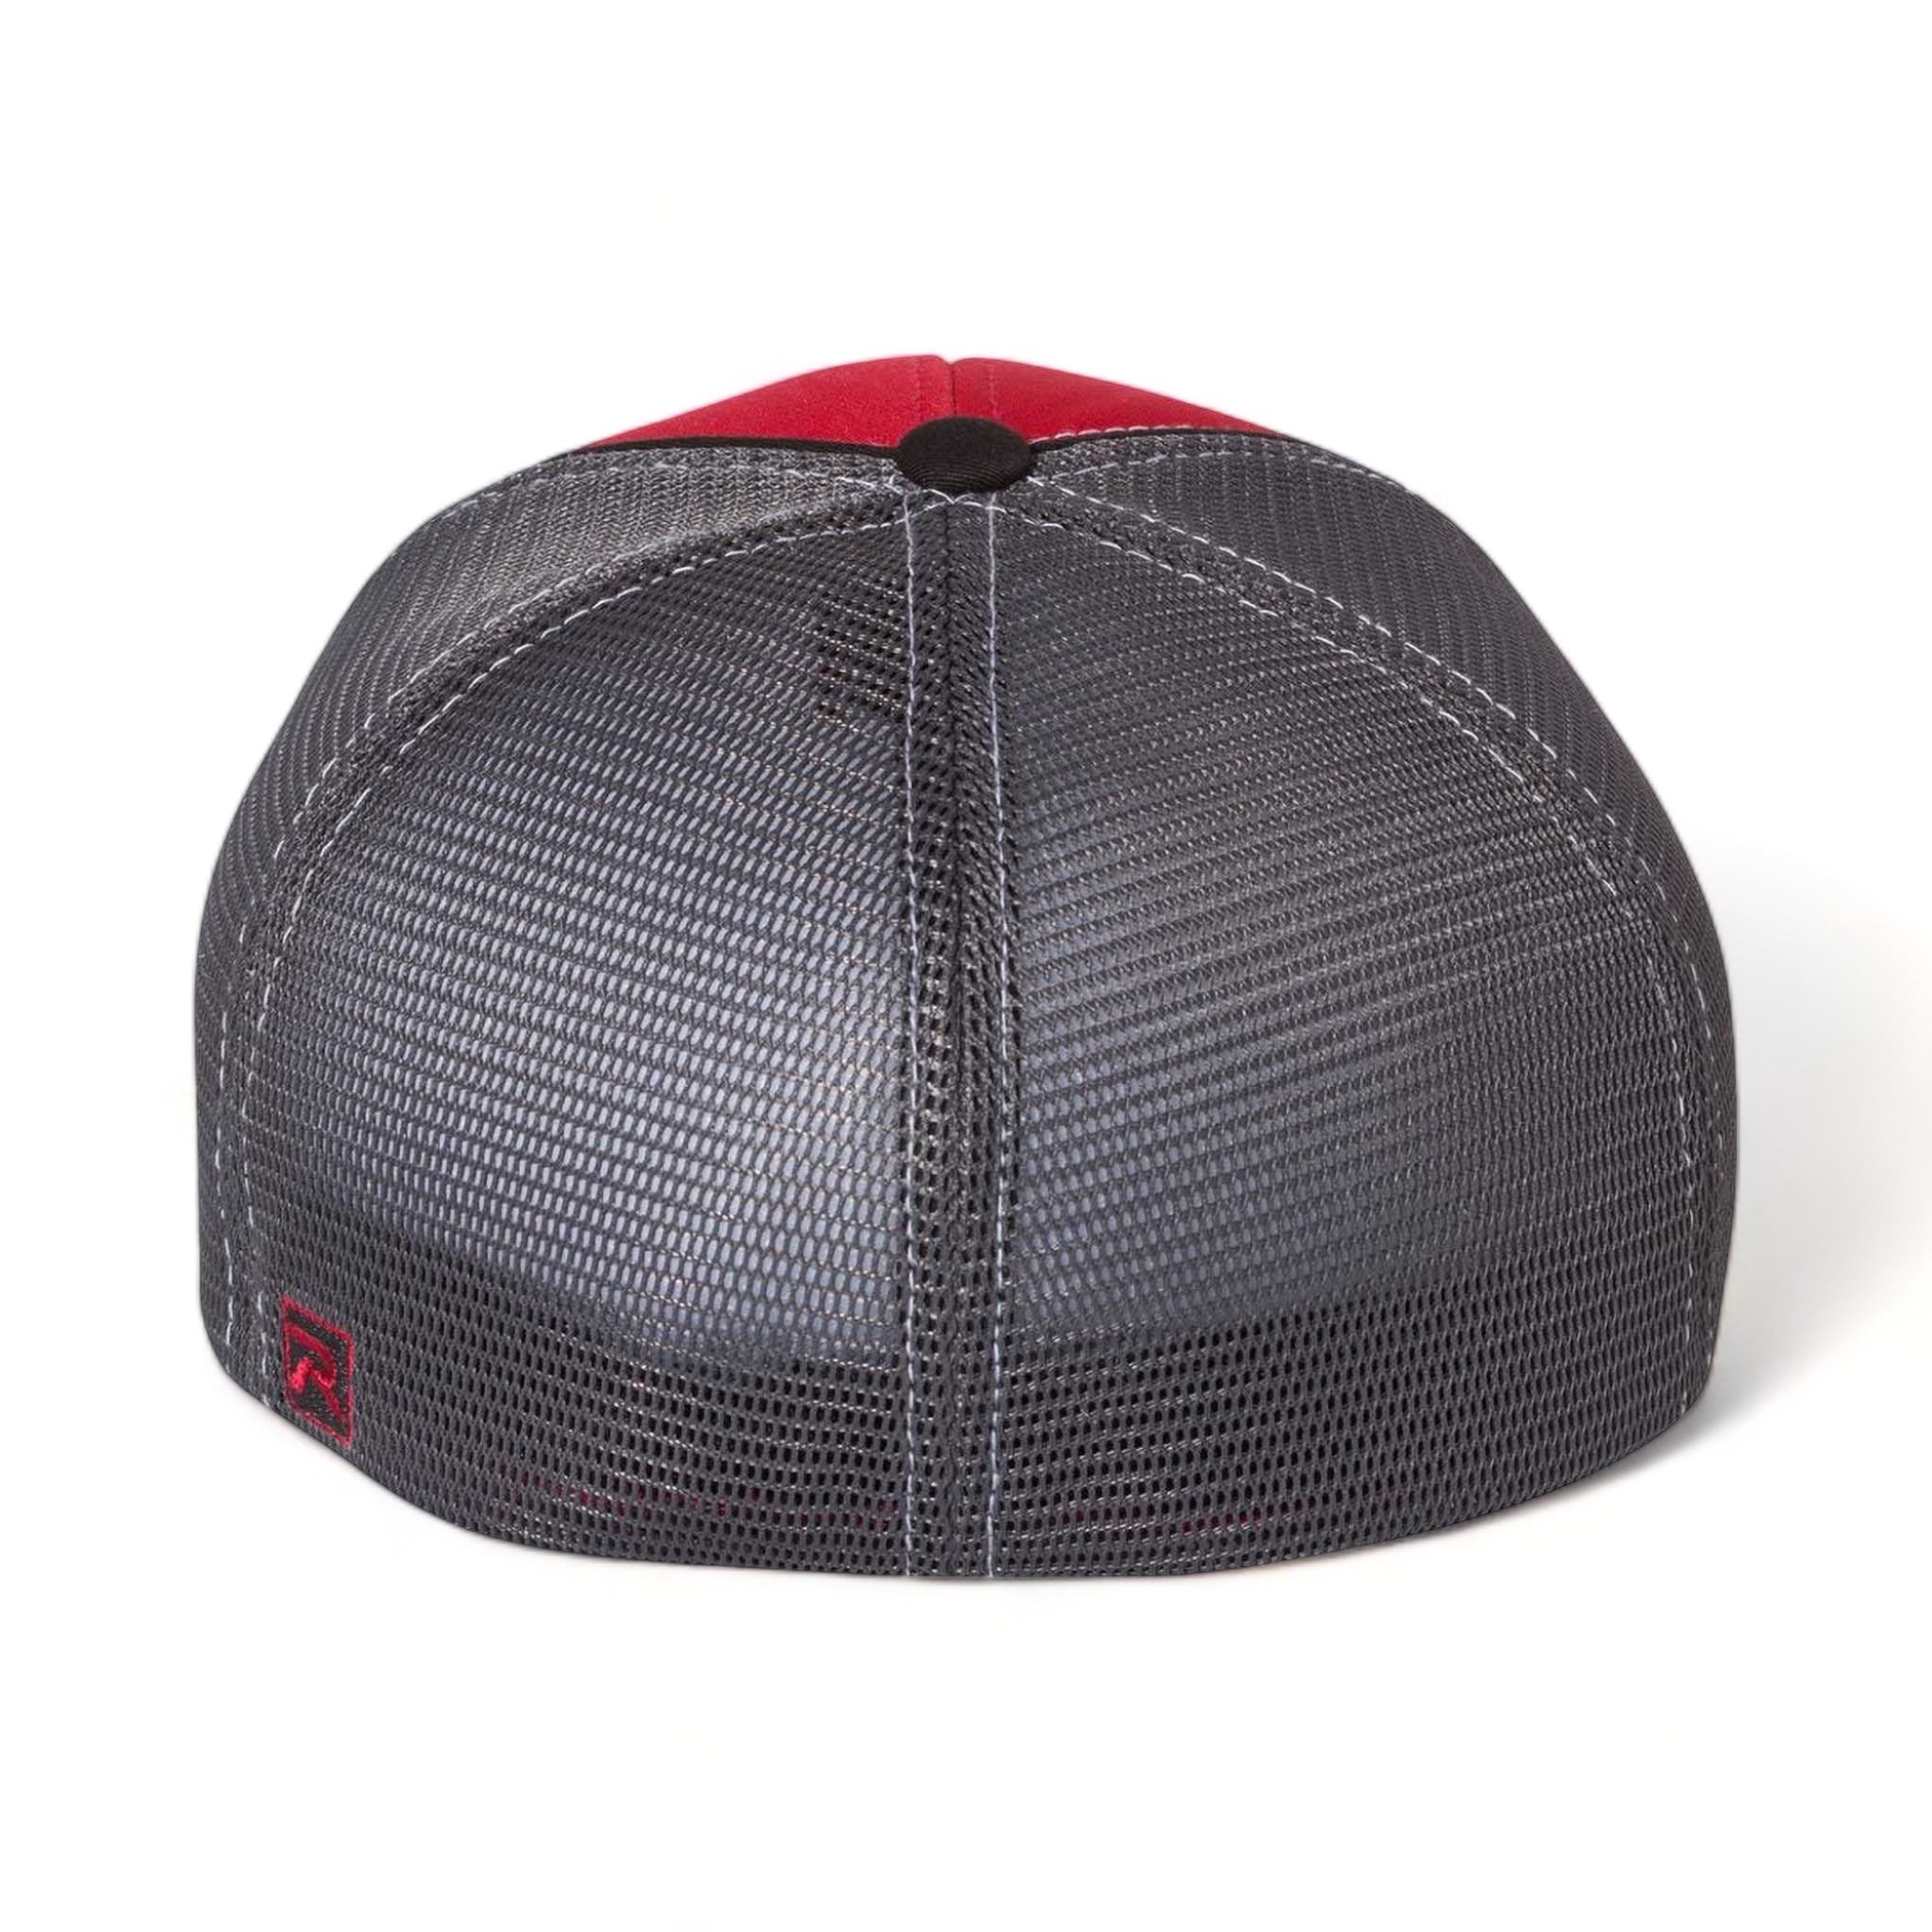 Back view of Richardson 172 custom hat in red, charcoal and black tri